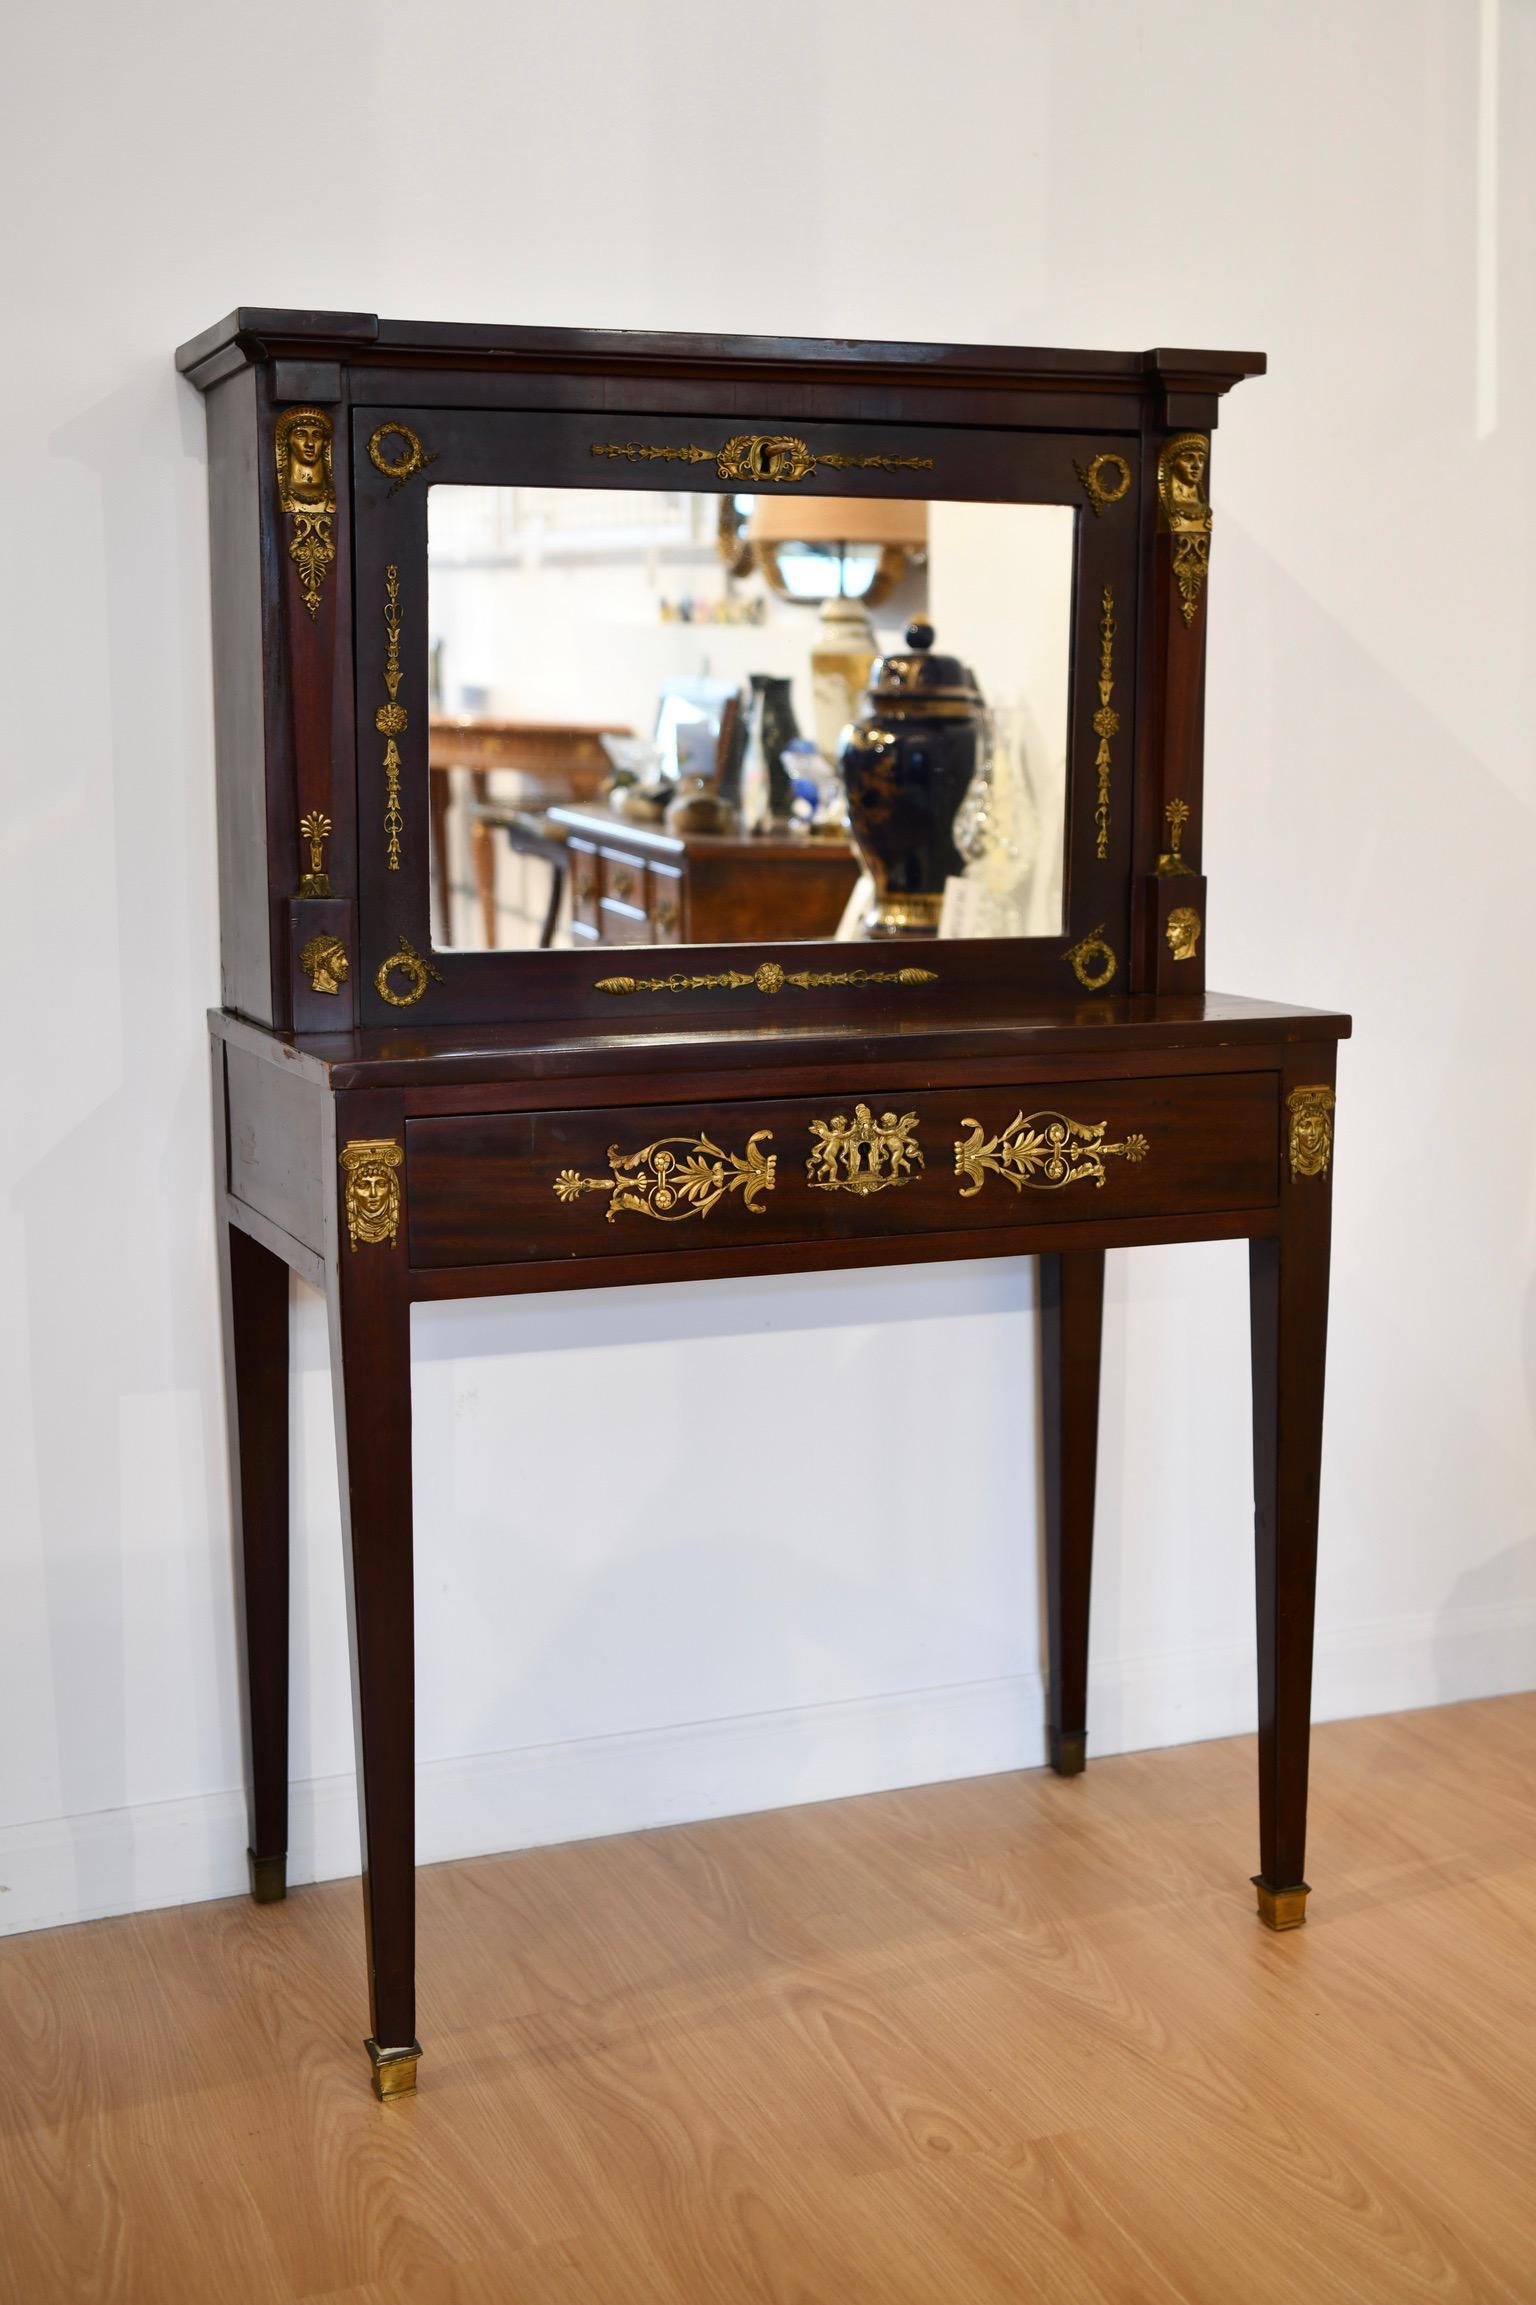 19th century French Empire mahogany Bonheur du Jour desk. The upper section is decorated with classical motifs of pharaoh masks and wreaths around a mirrored secretary fall-front with compartments and a writing pad over the lower section. Bottom